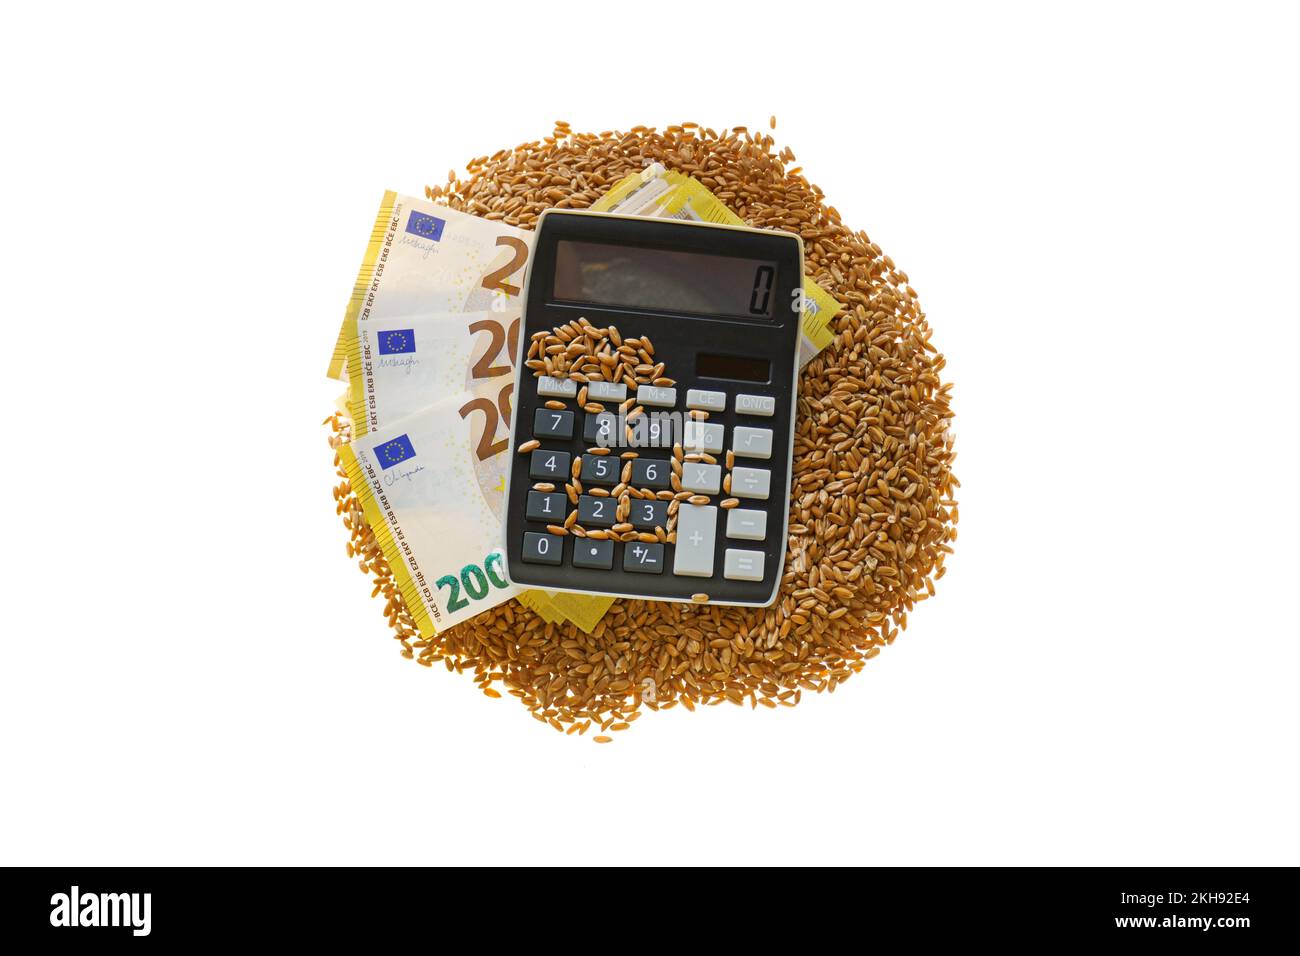 Sale and purchase of wheat concept. Wheat prices. Wheat grains, euro banknotes and a calculator on a white background.Food crisis. Growth in world Stock Photo